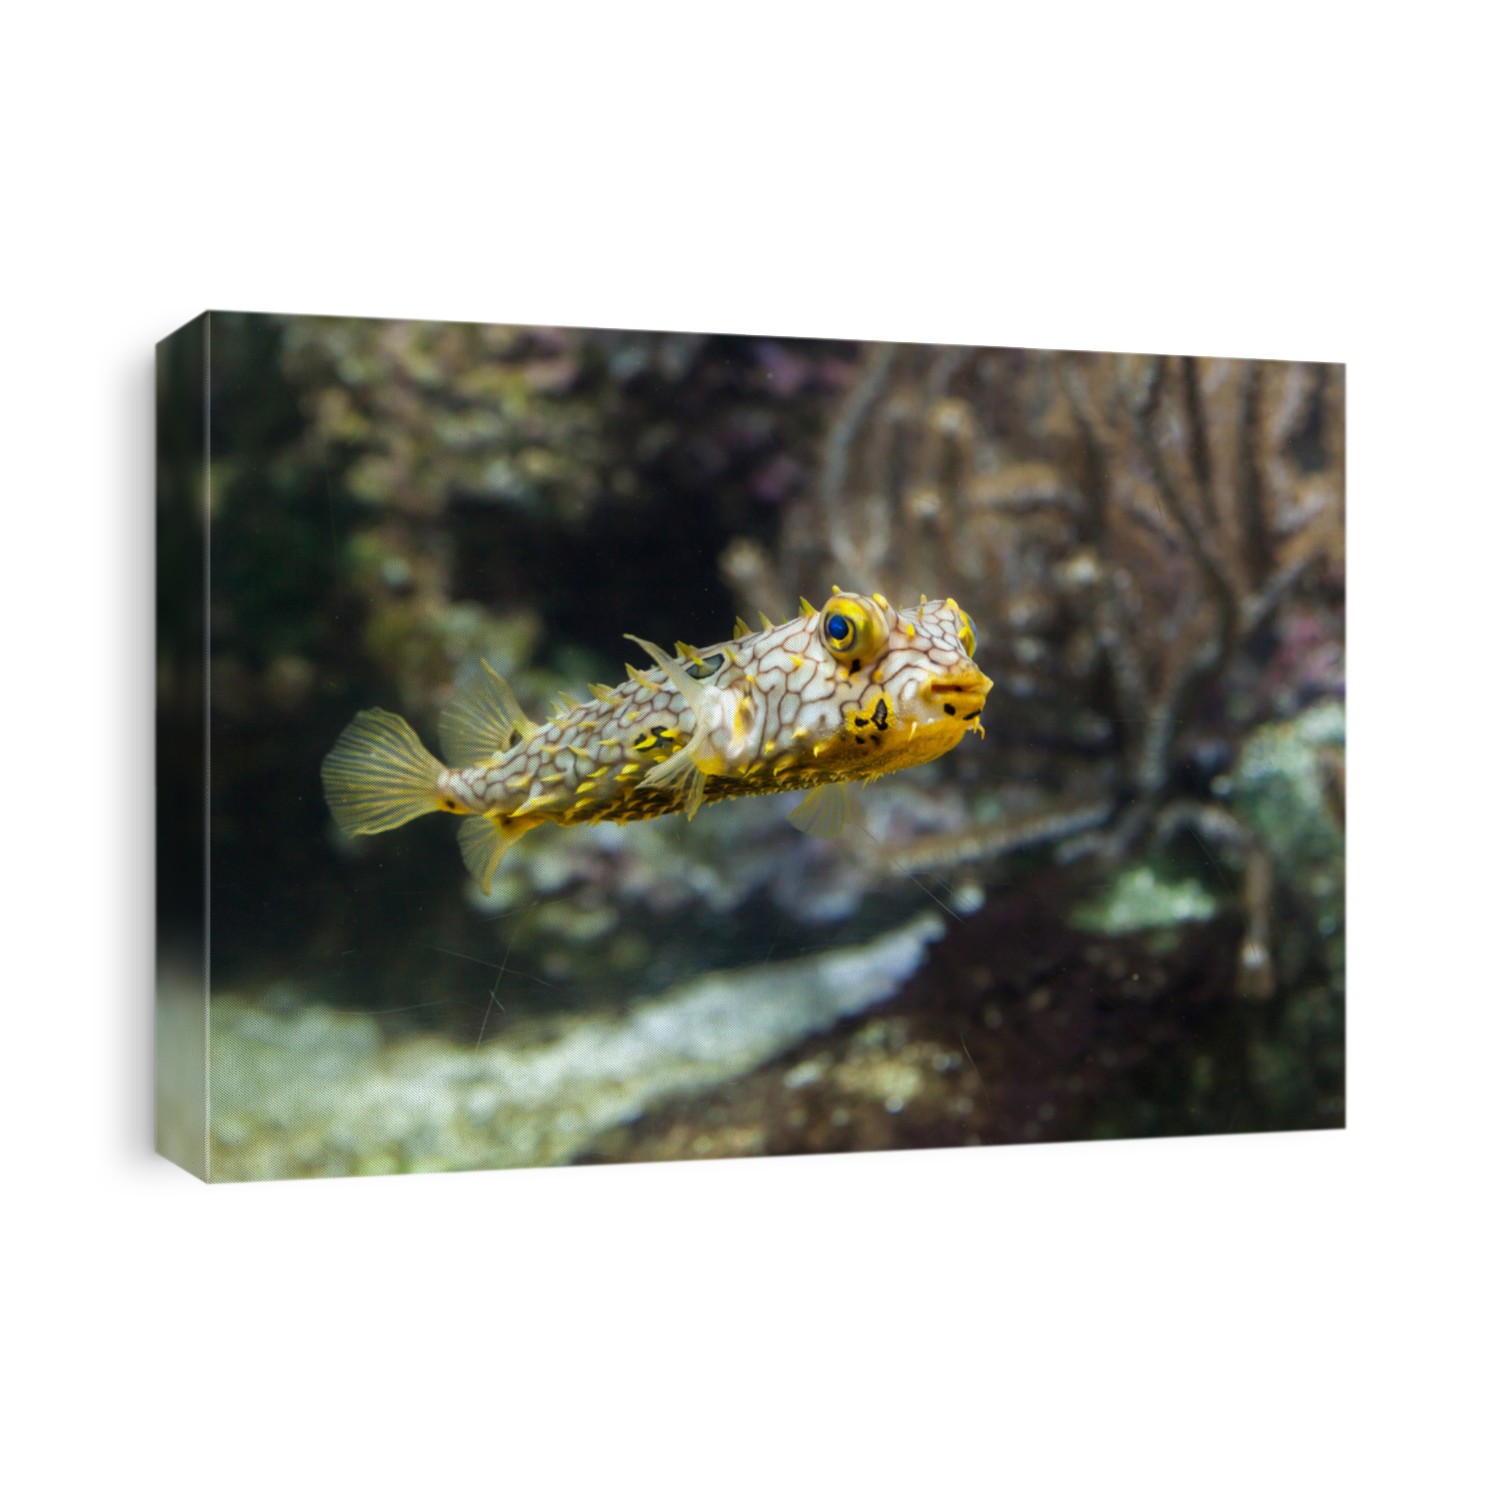 Striped burrfish (Chilomycterus schoepfi), also known as the spiny boxfish.